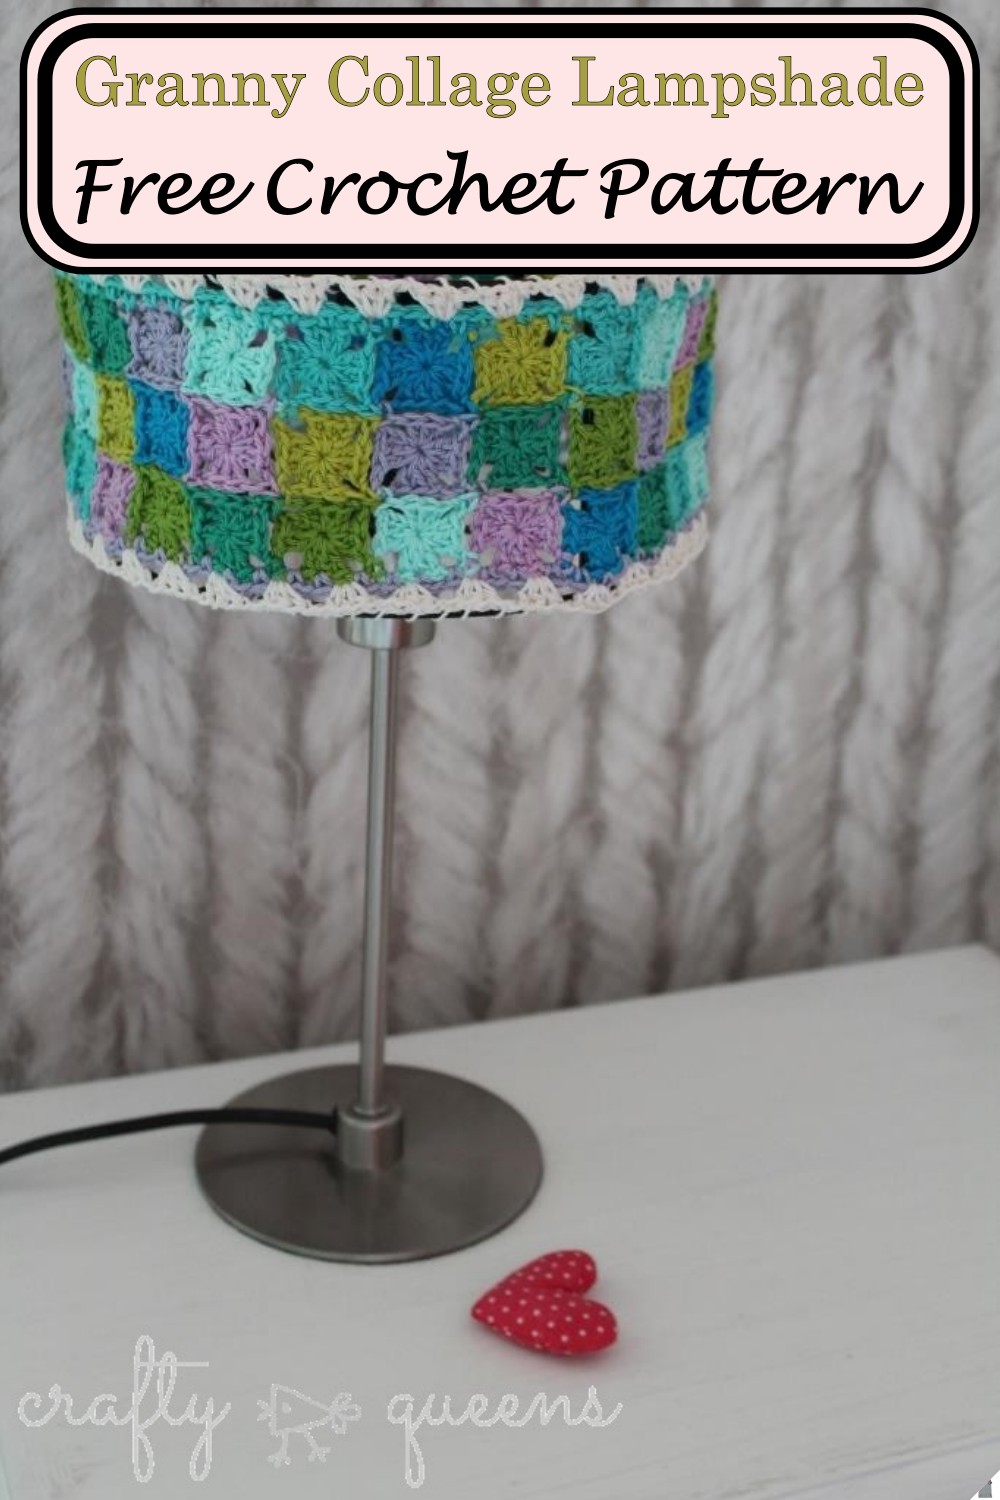 Granny Collage Lampshade Pattern